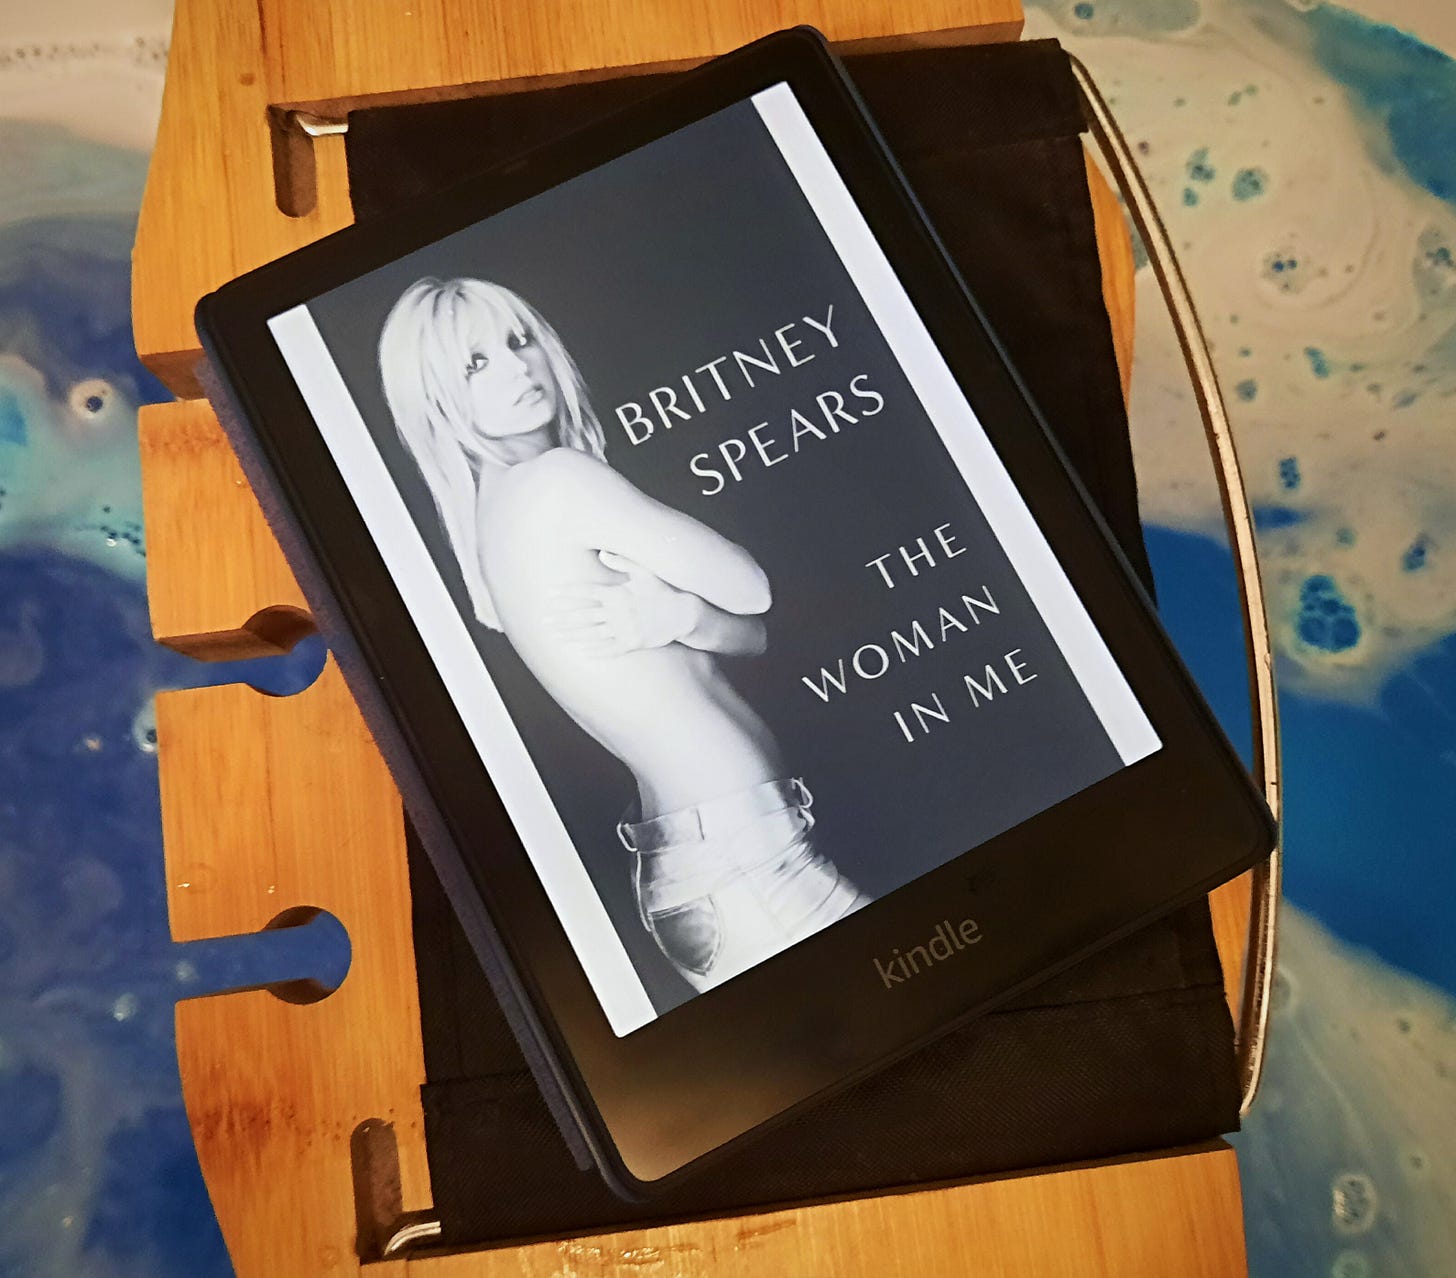 Paula’s Kindle is on a wooden tray placed over a bath. The Kindle is open on the title page of The Woman in Me by Britney Spears. The bathwater is blue as the result of a bath bomb.